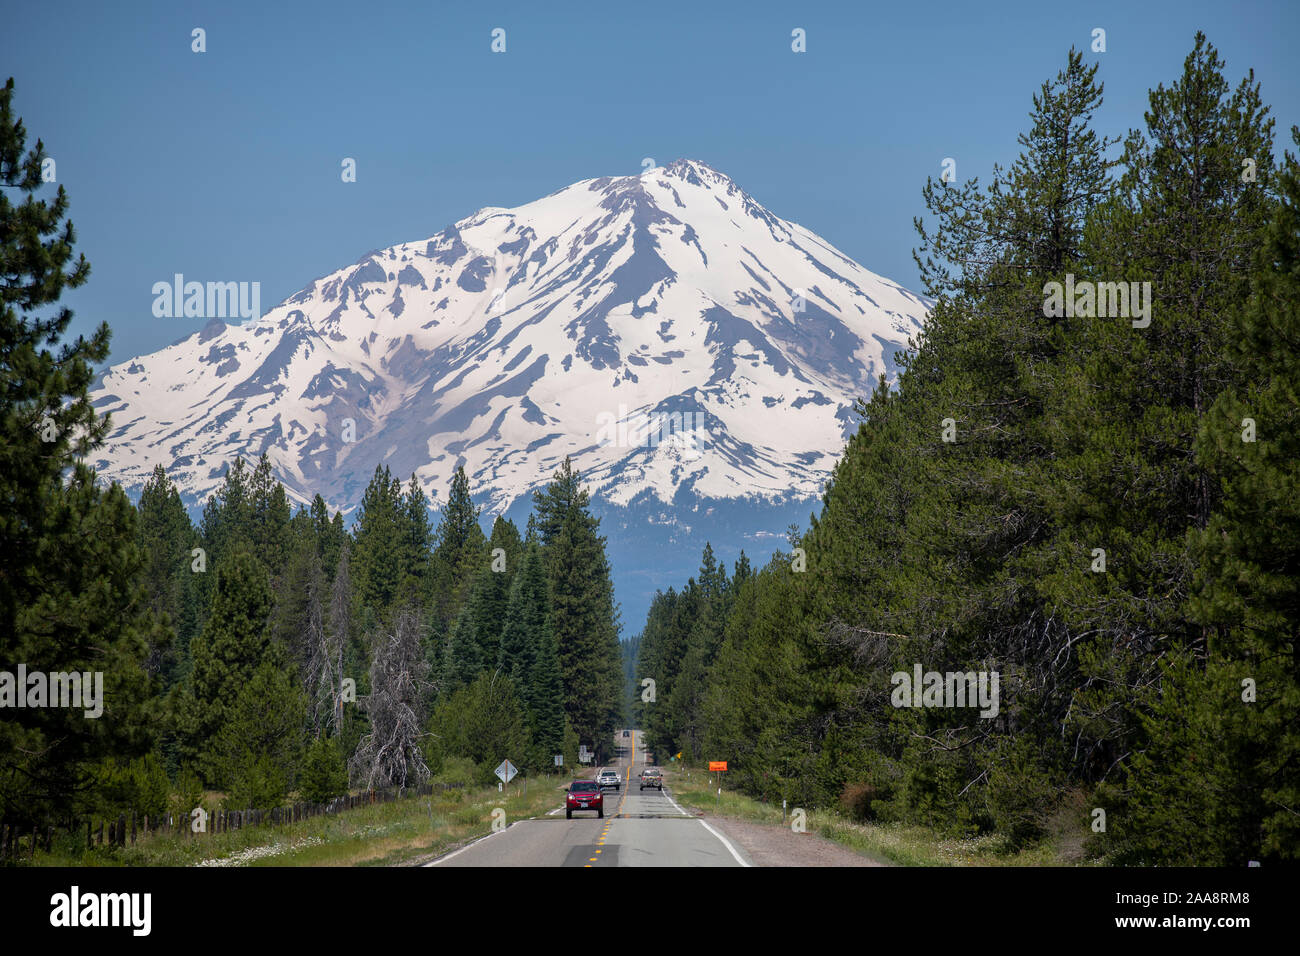 Cars on a two lane highway 89 leading to snow covered Mount Shasta Stock Photo